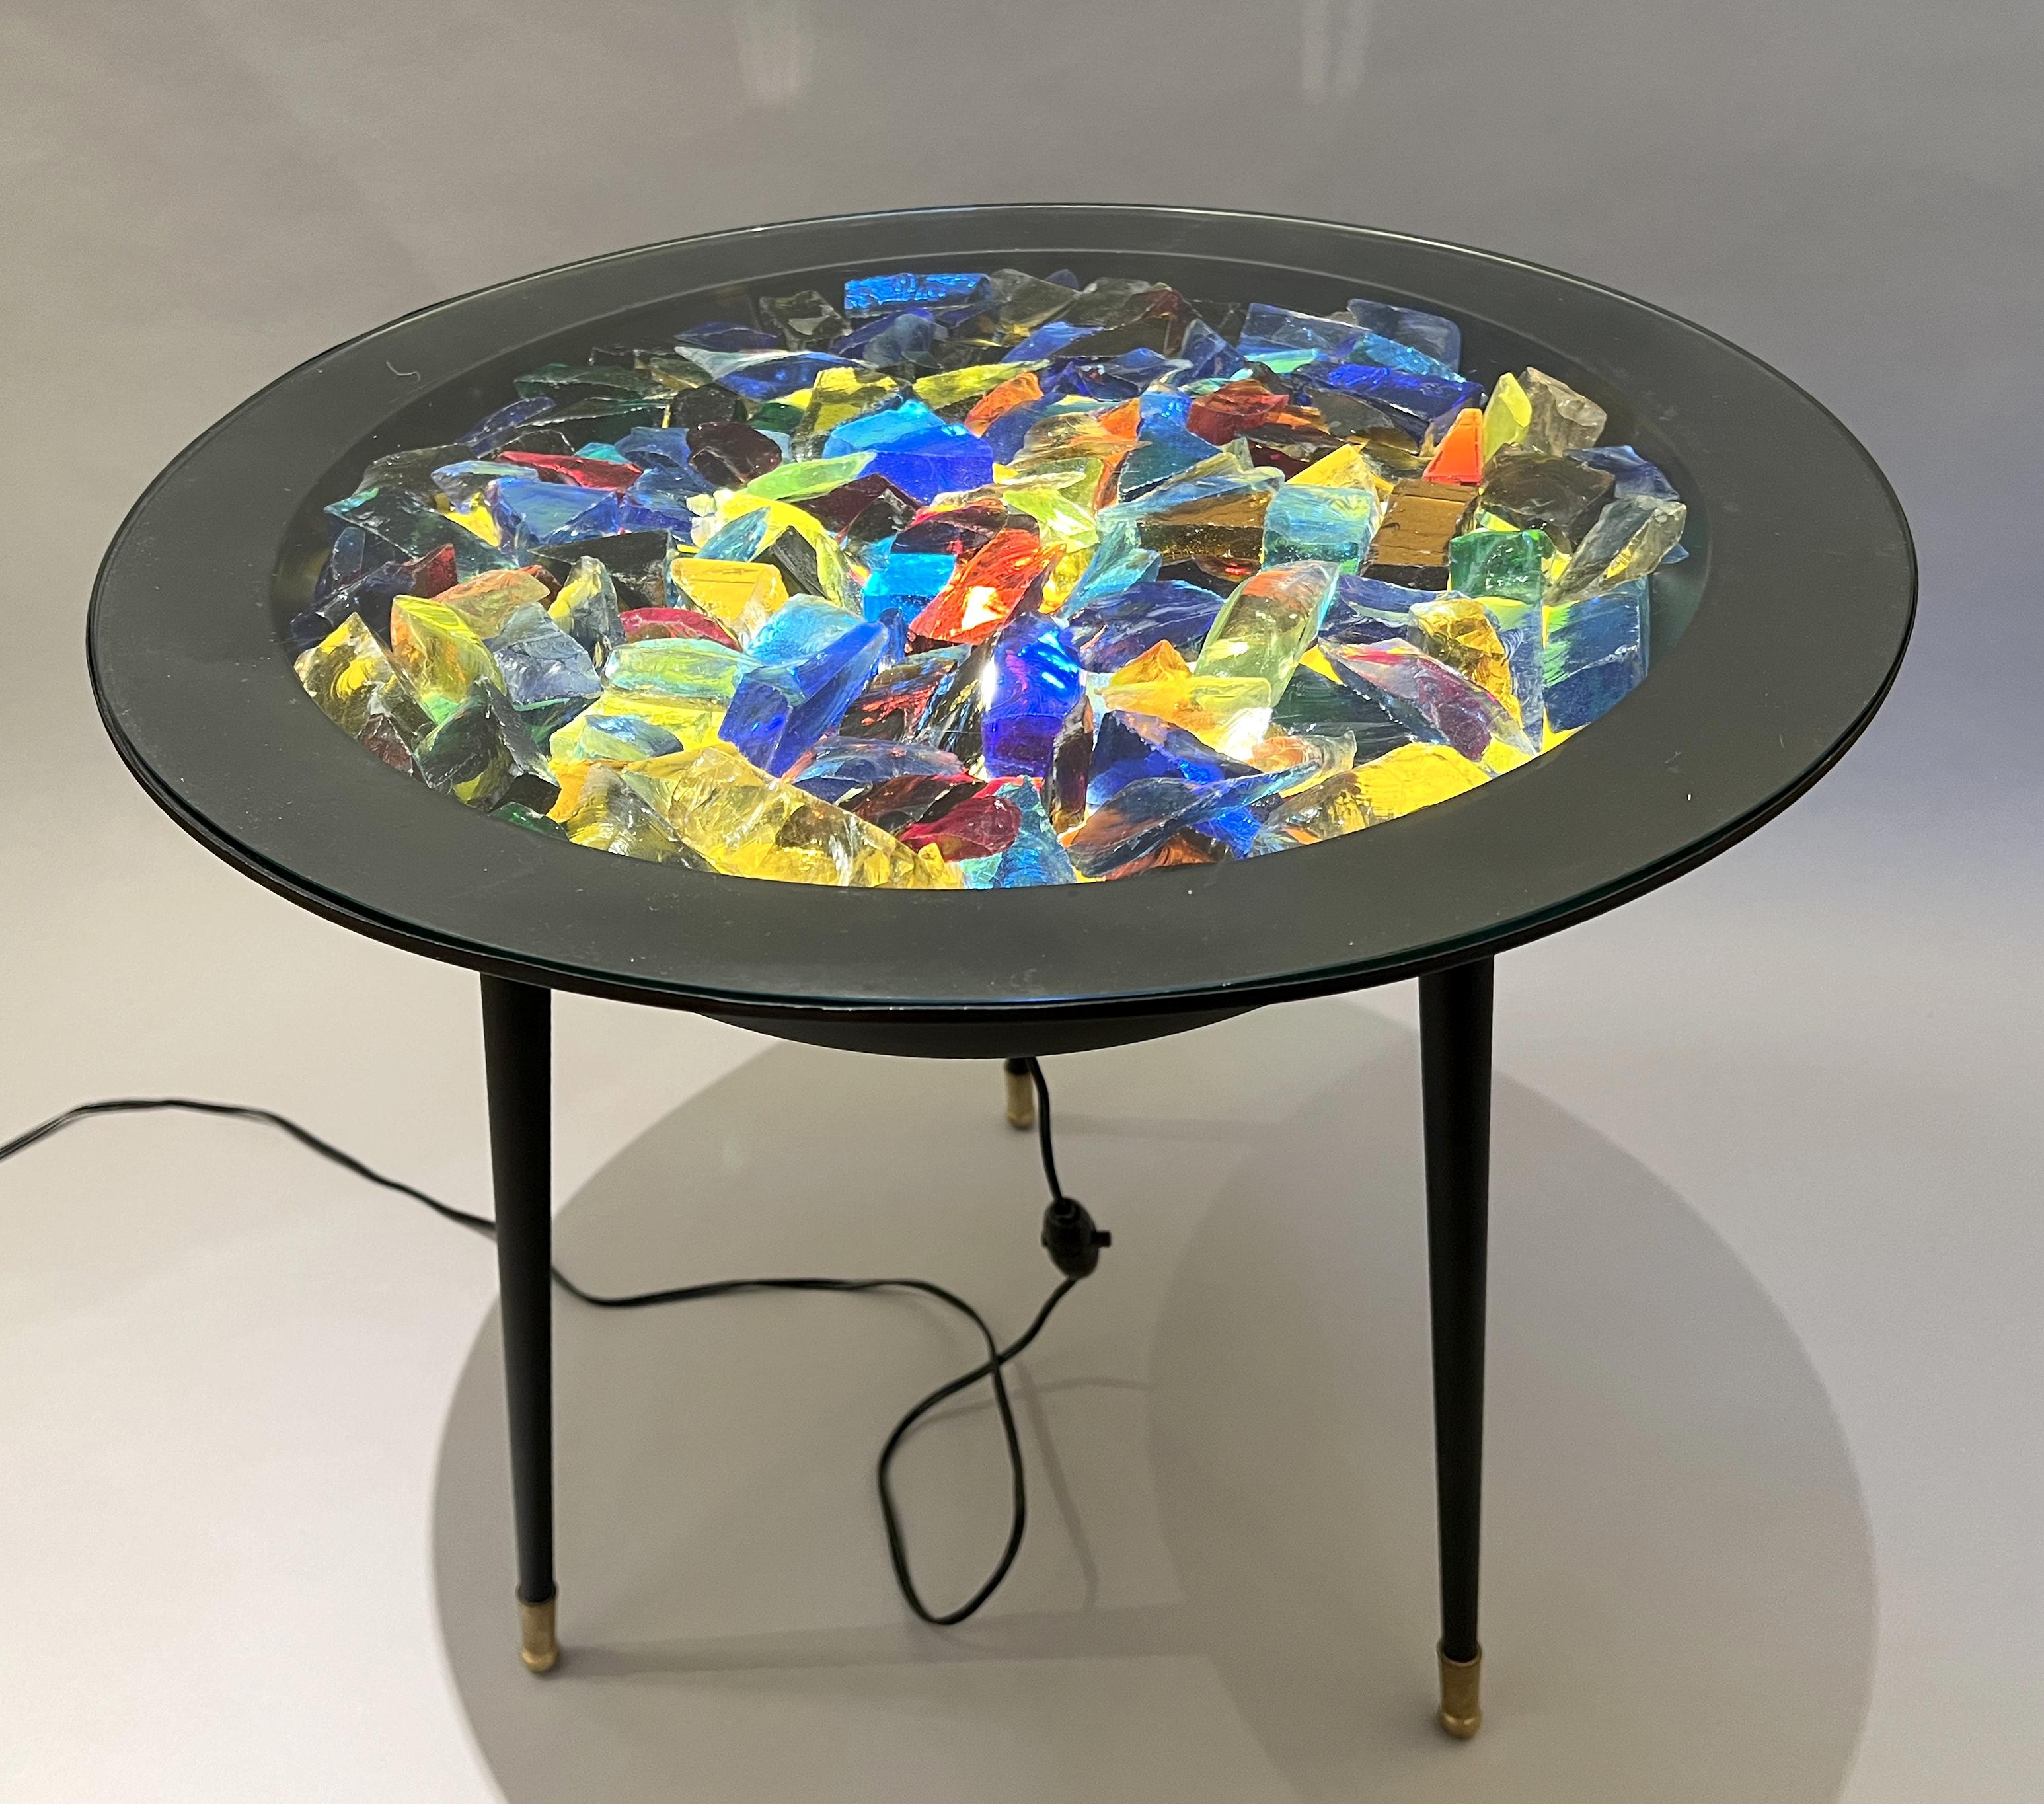 Interesting luminous pedestal table featuring a round basin with three black-lacquered iron legs. The legs are finished with brass sabots.
The basin contains multicolored glass pieces trapped between two glass plates. It is lit from below by an